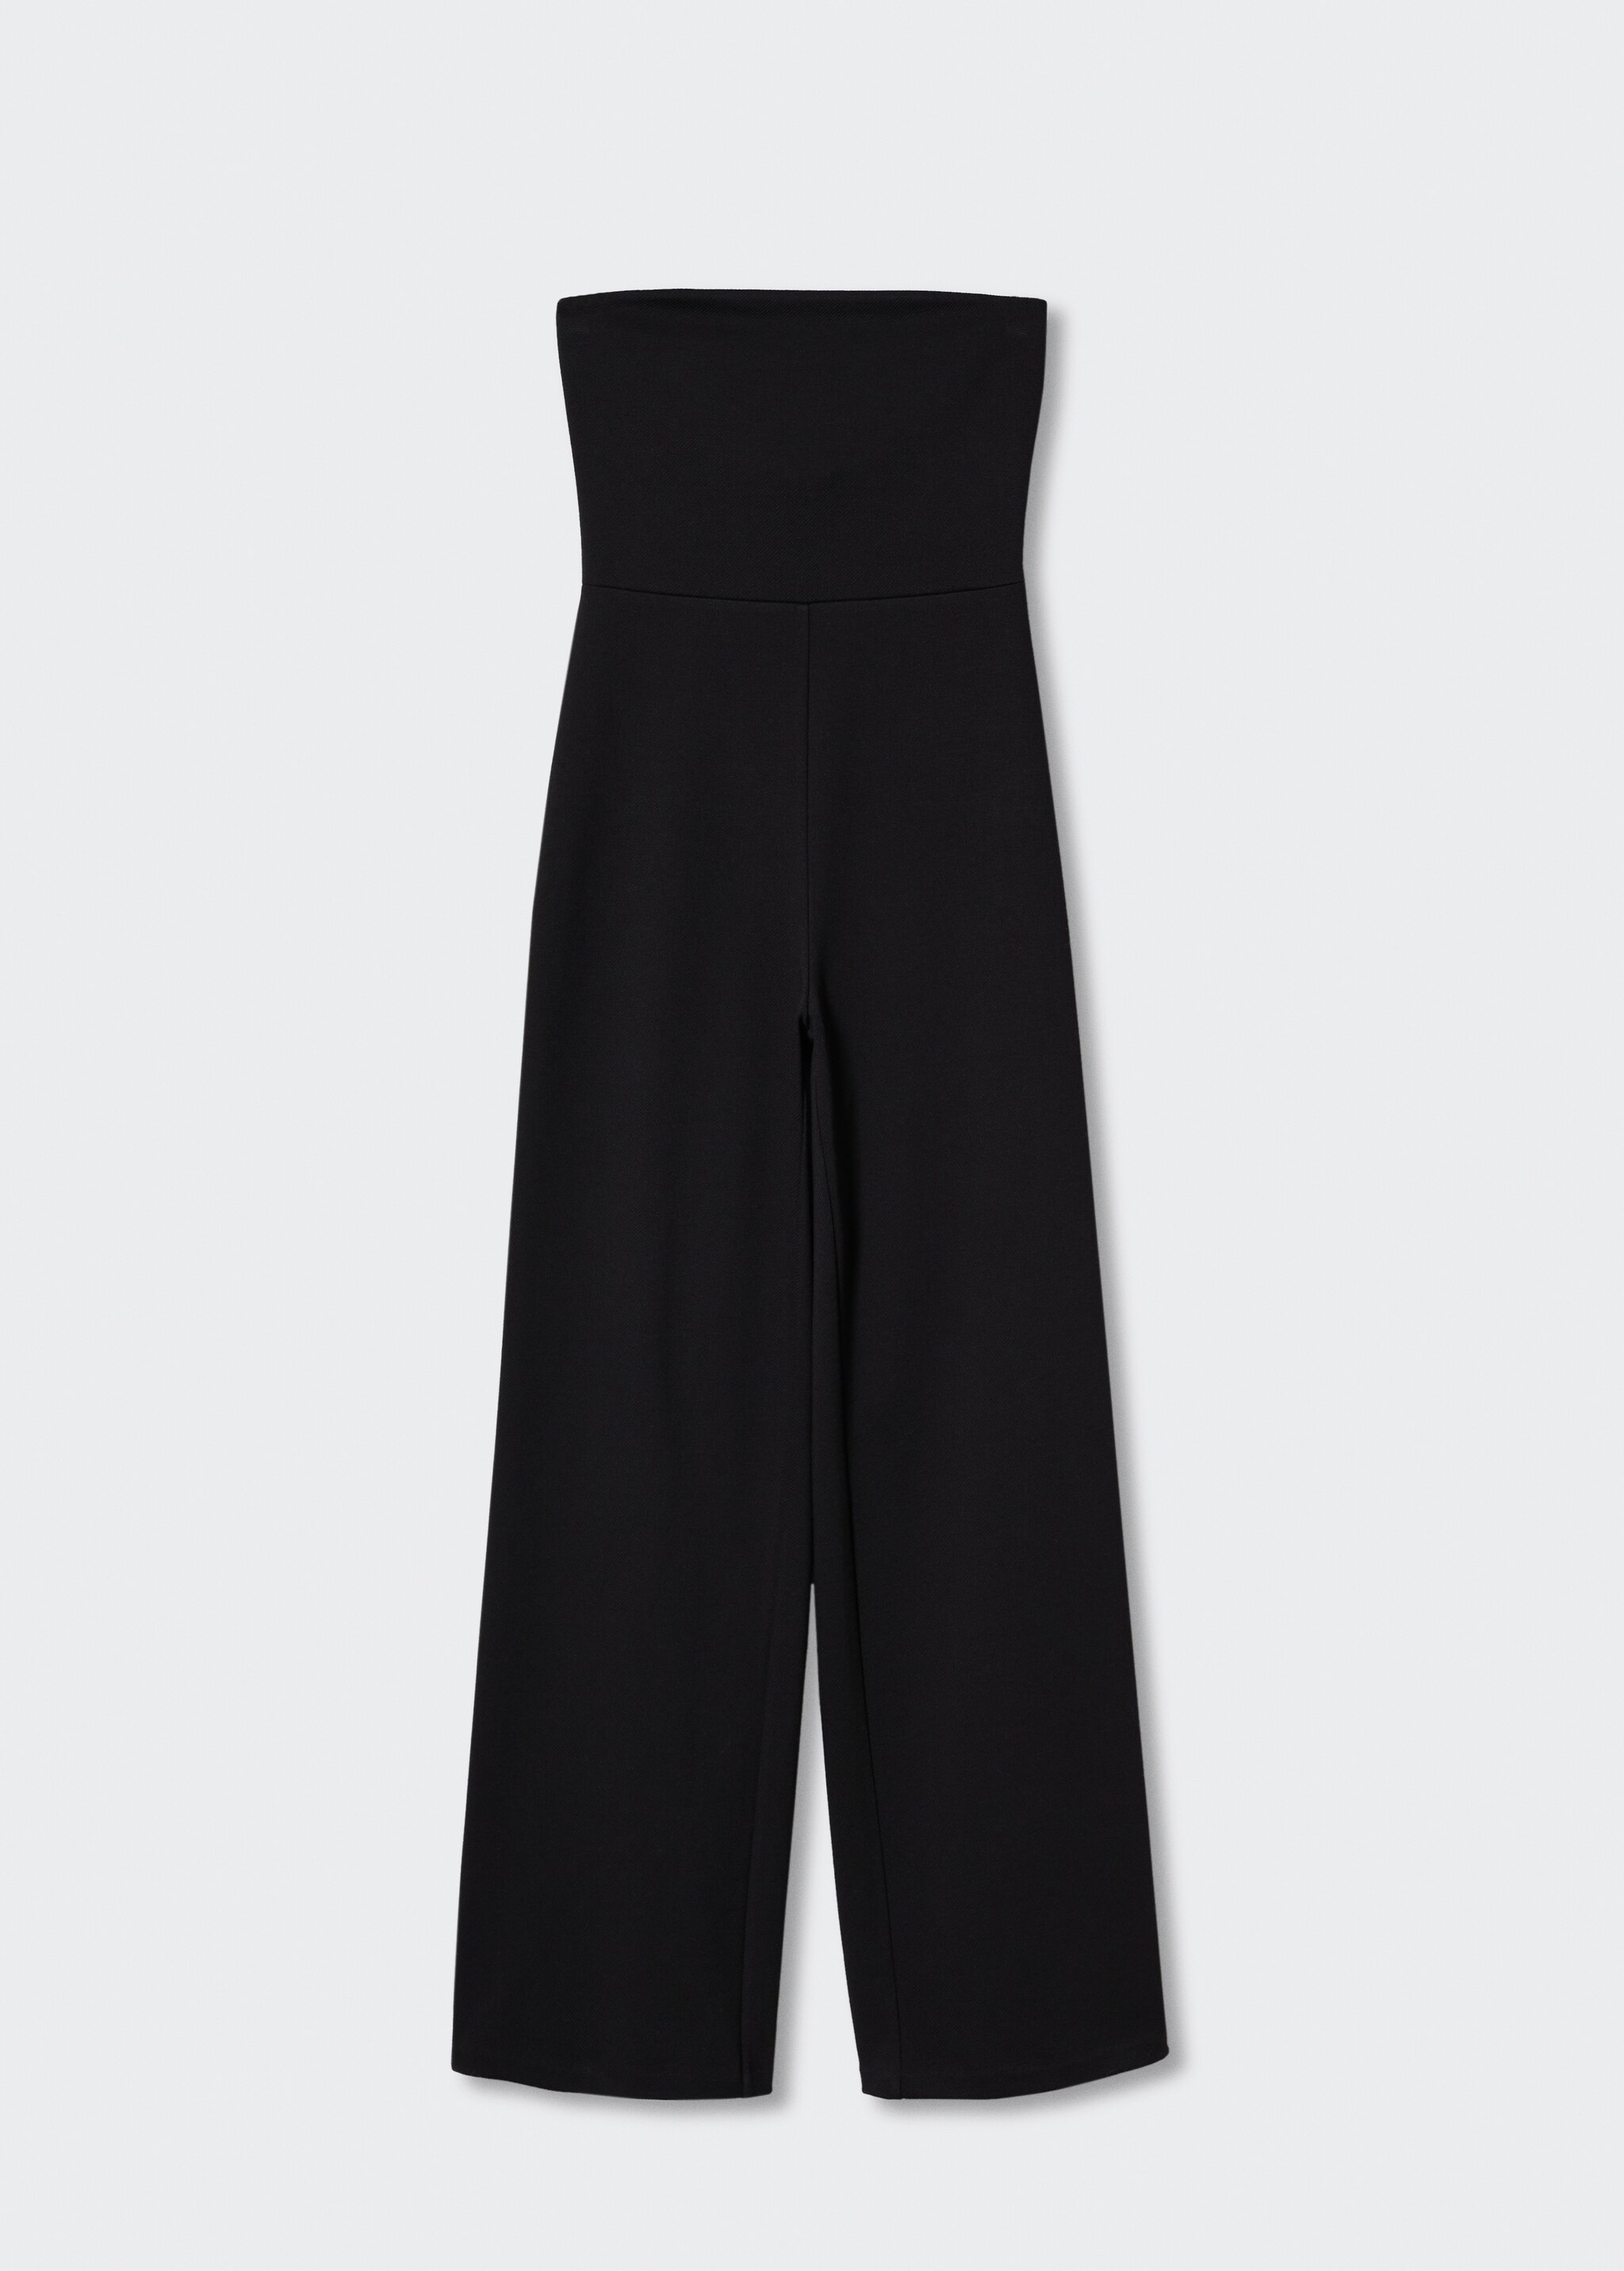 Strapless jumpsuit - Article without model